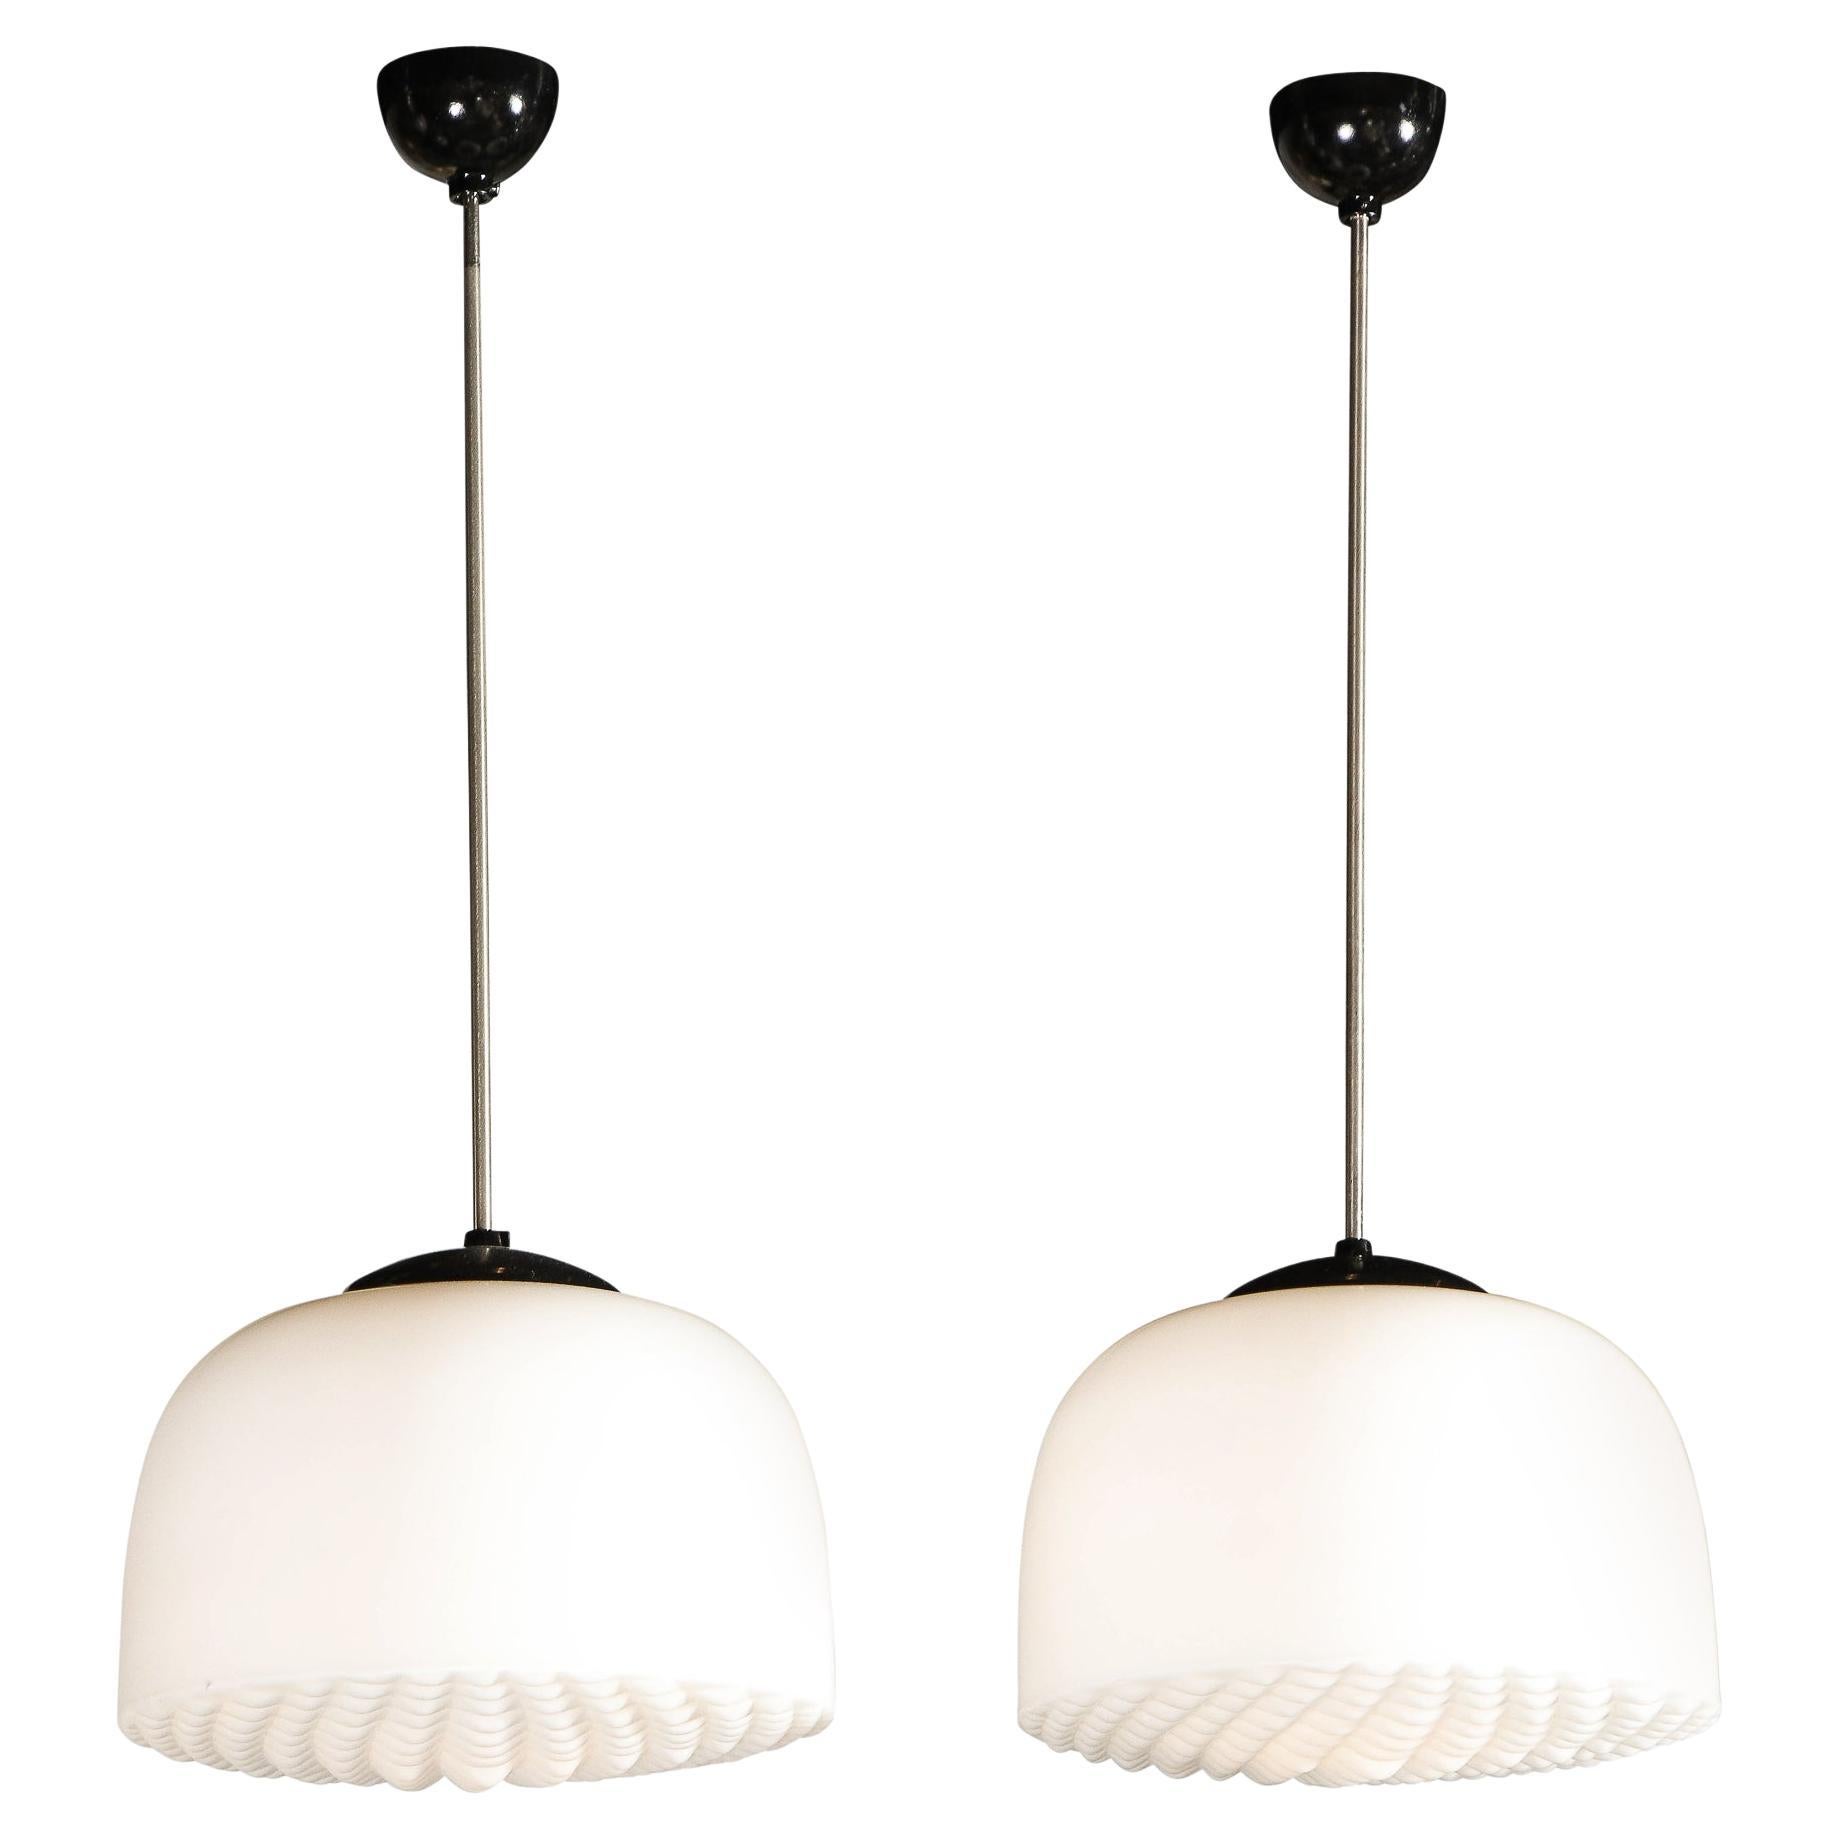 Pair of Mid-Century Modern Brass, Enamel and Waffle Milk Glass Globe Chandeliers For Sale